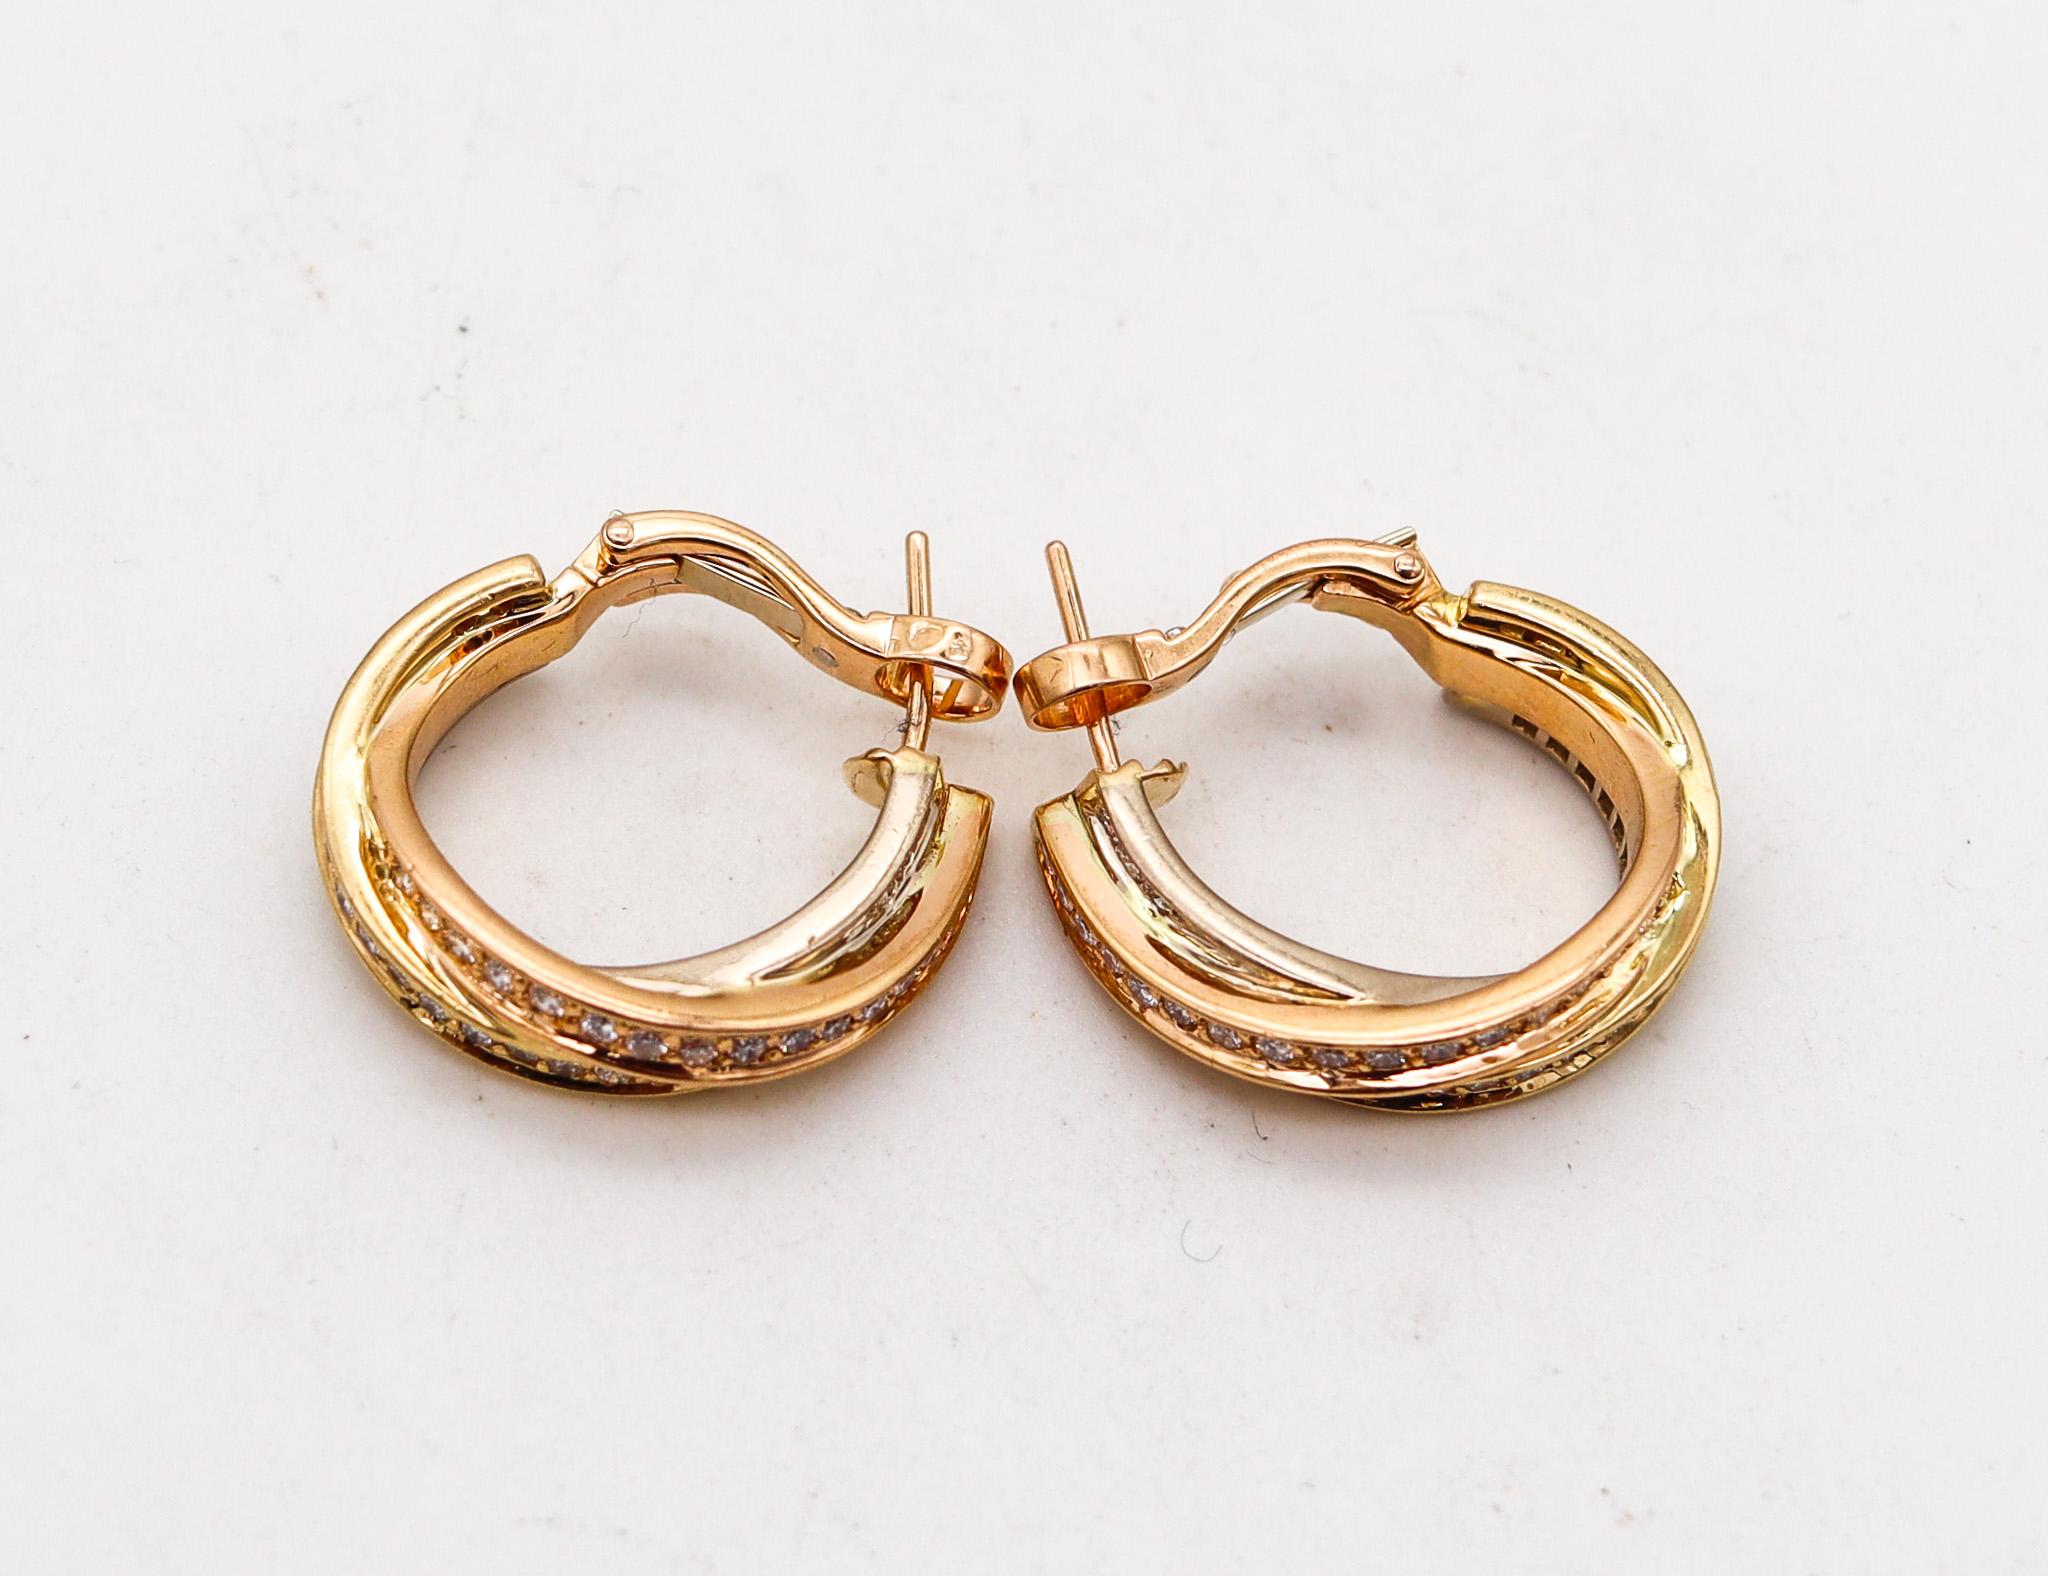 Brilliant Cut Cartier Paris Trinity Earrings In 18Kt Yellow Gold With 2.07 Ctw In Diamonds For Sale